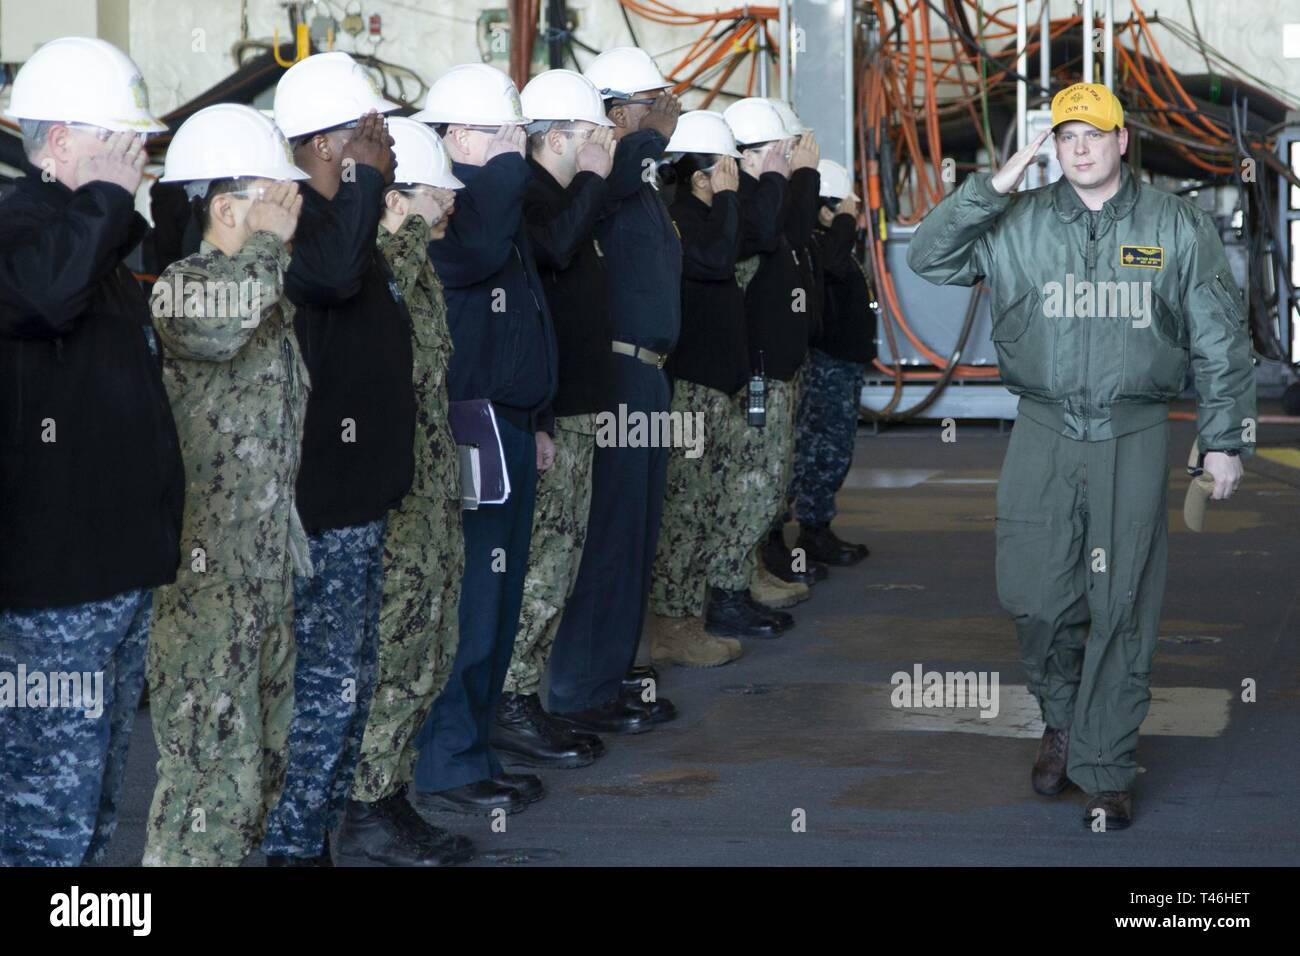 NEWPORT NEWS, Va. (March 12, 2019) Lt. Matthew Herbaugh, from Aynor, South Carolina, USS Gerald R. Ford's (CVN 78) assistant air operations officer, returns the salutes of officers as he is piped ashore. Ford is currently undergoing its post-shakedown availability at Huntington Ingalls Industries-Newport News Shipbuilding. Stock Photo